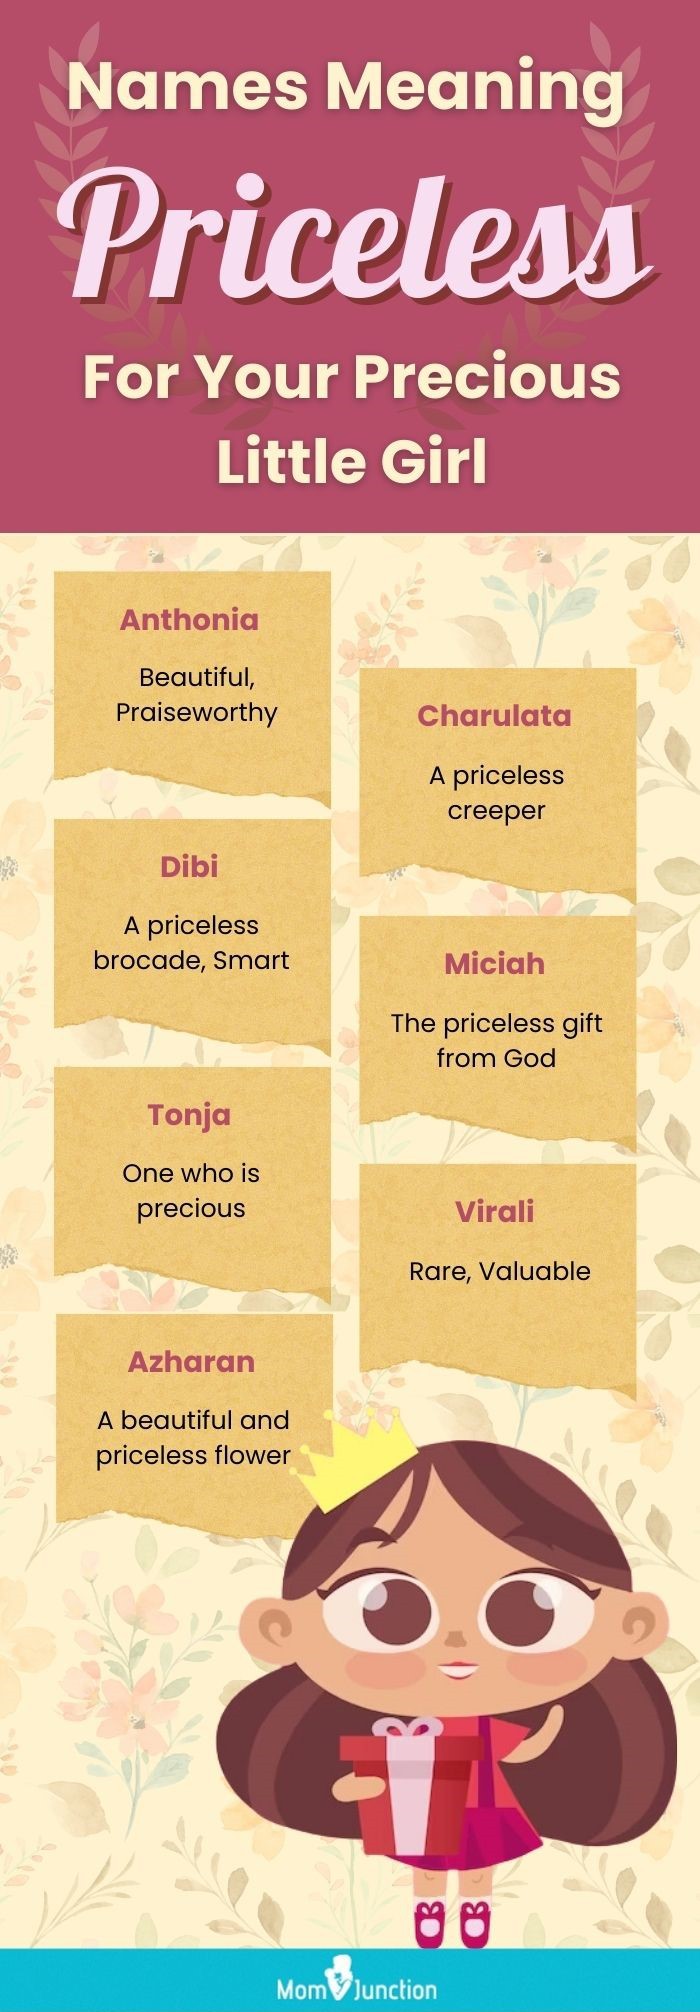 Names Meaning Priceless For Your Precious Little Girl (infographic)